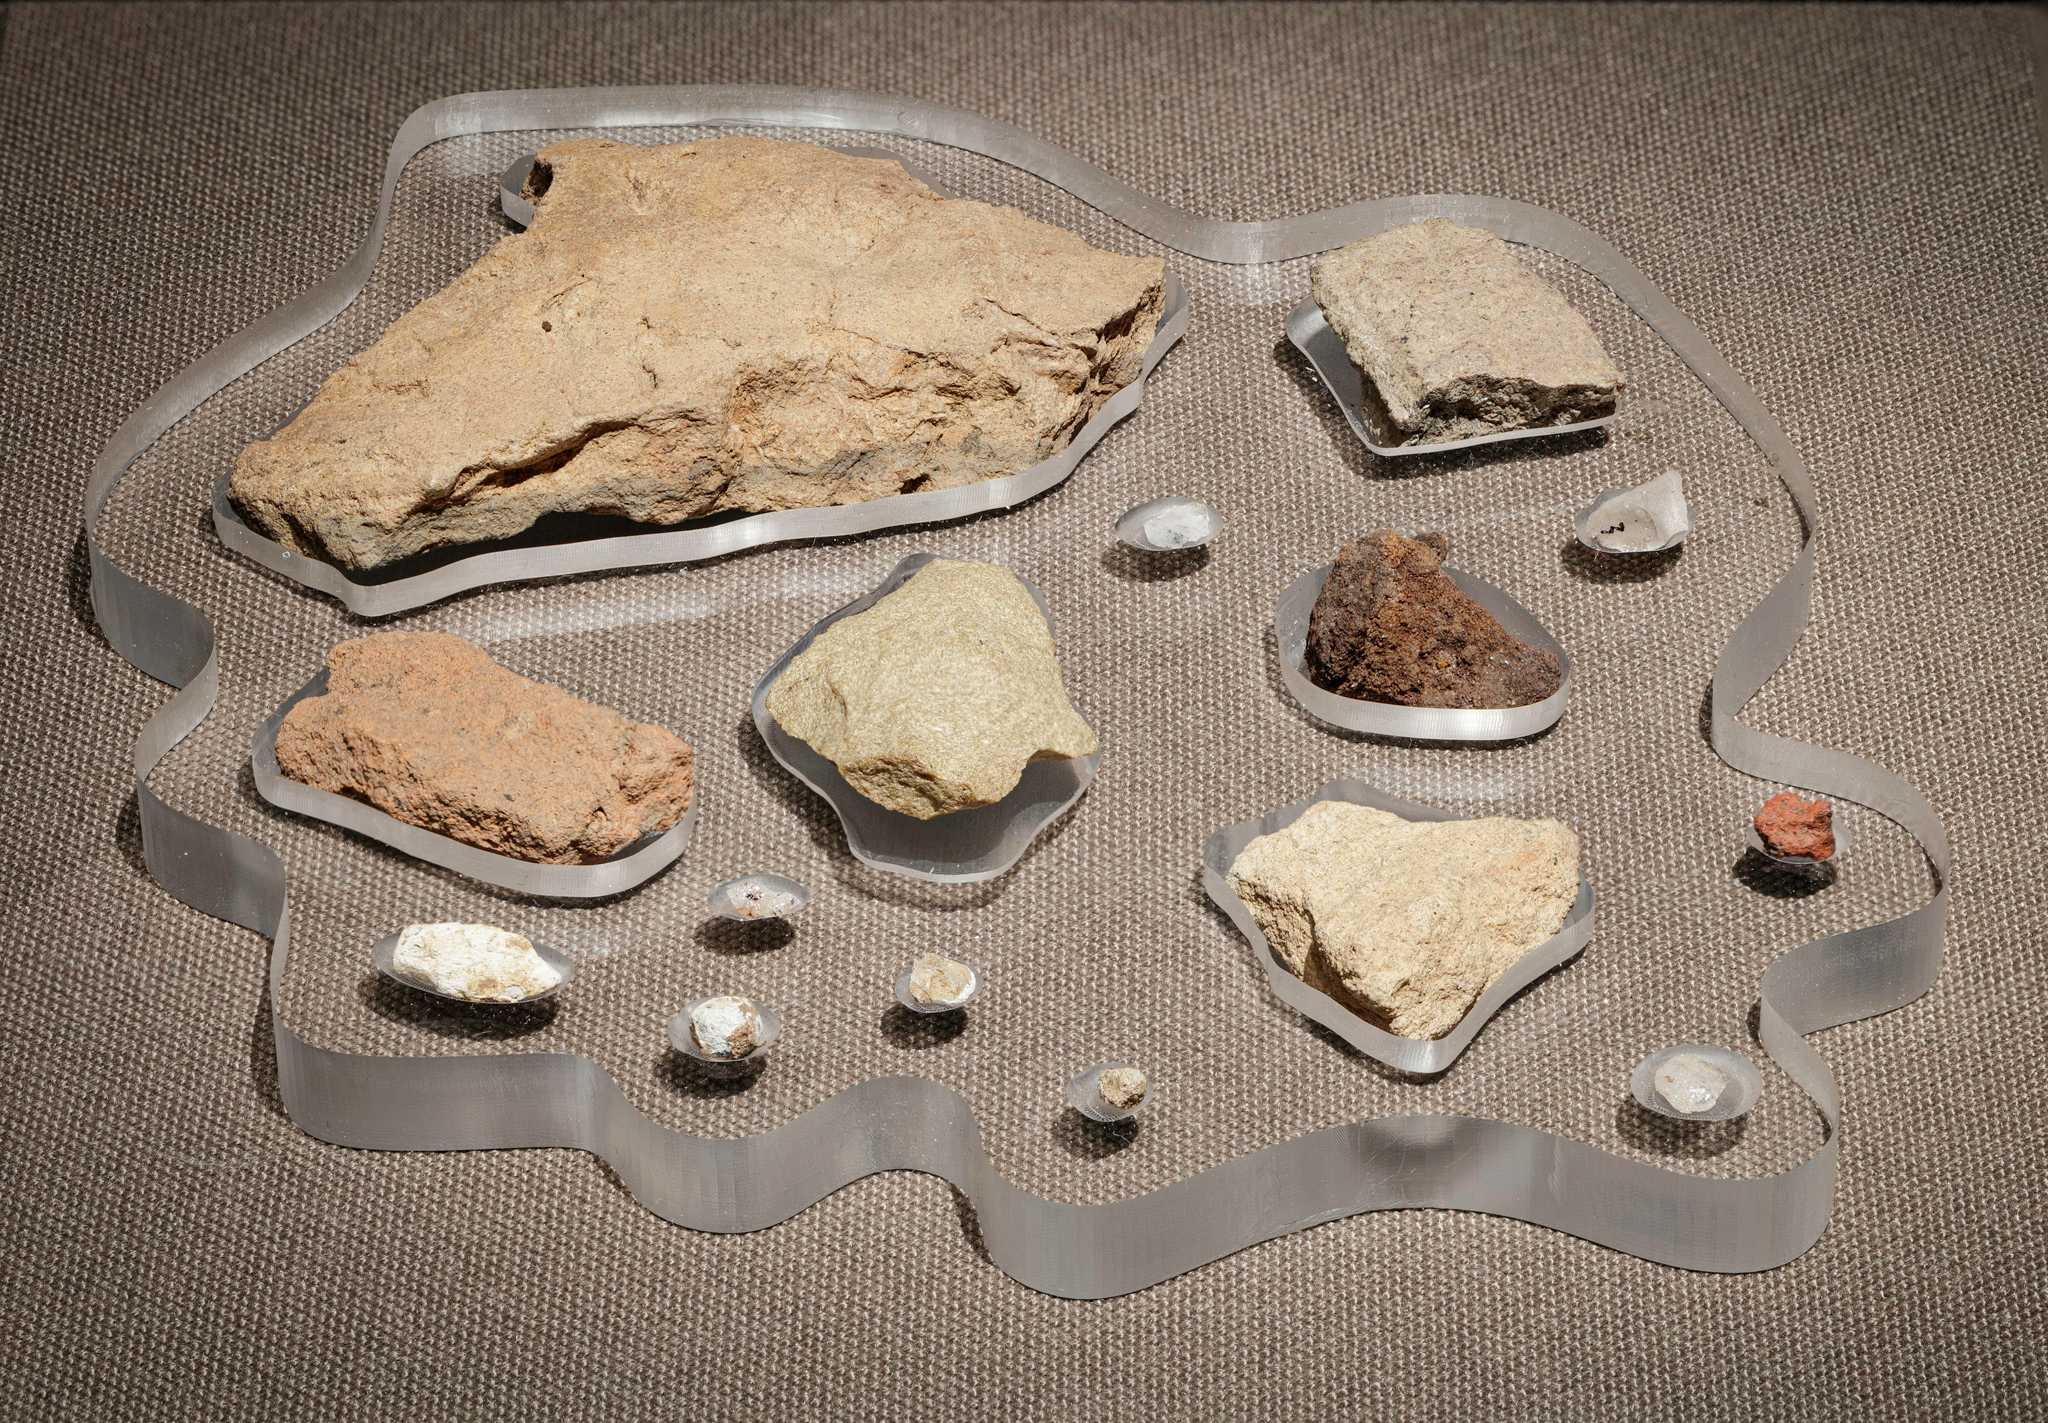 Photograph of a group of artifacts from the Great Dismal Swamp National Wildlife Refuge